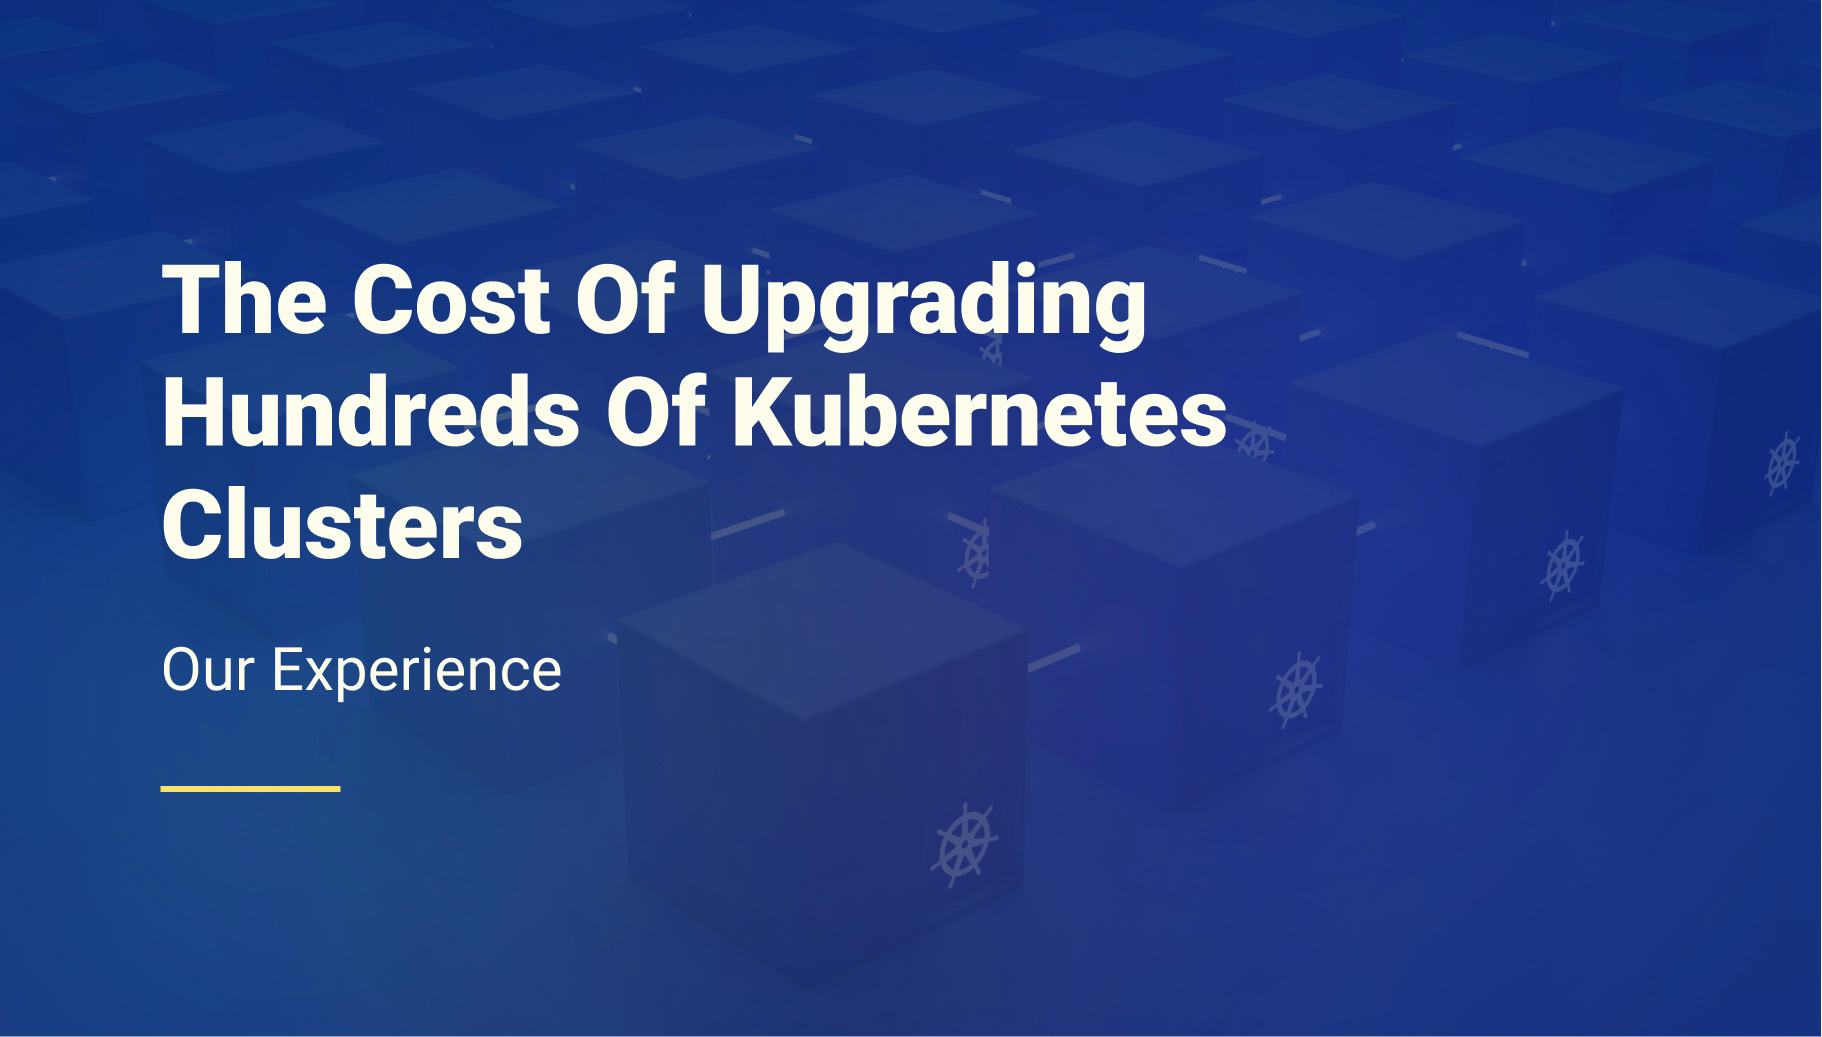 The Cost of Upgrading Hundreds of Kubernetes Clusters